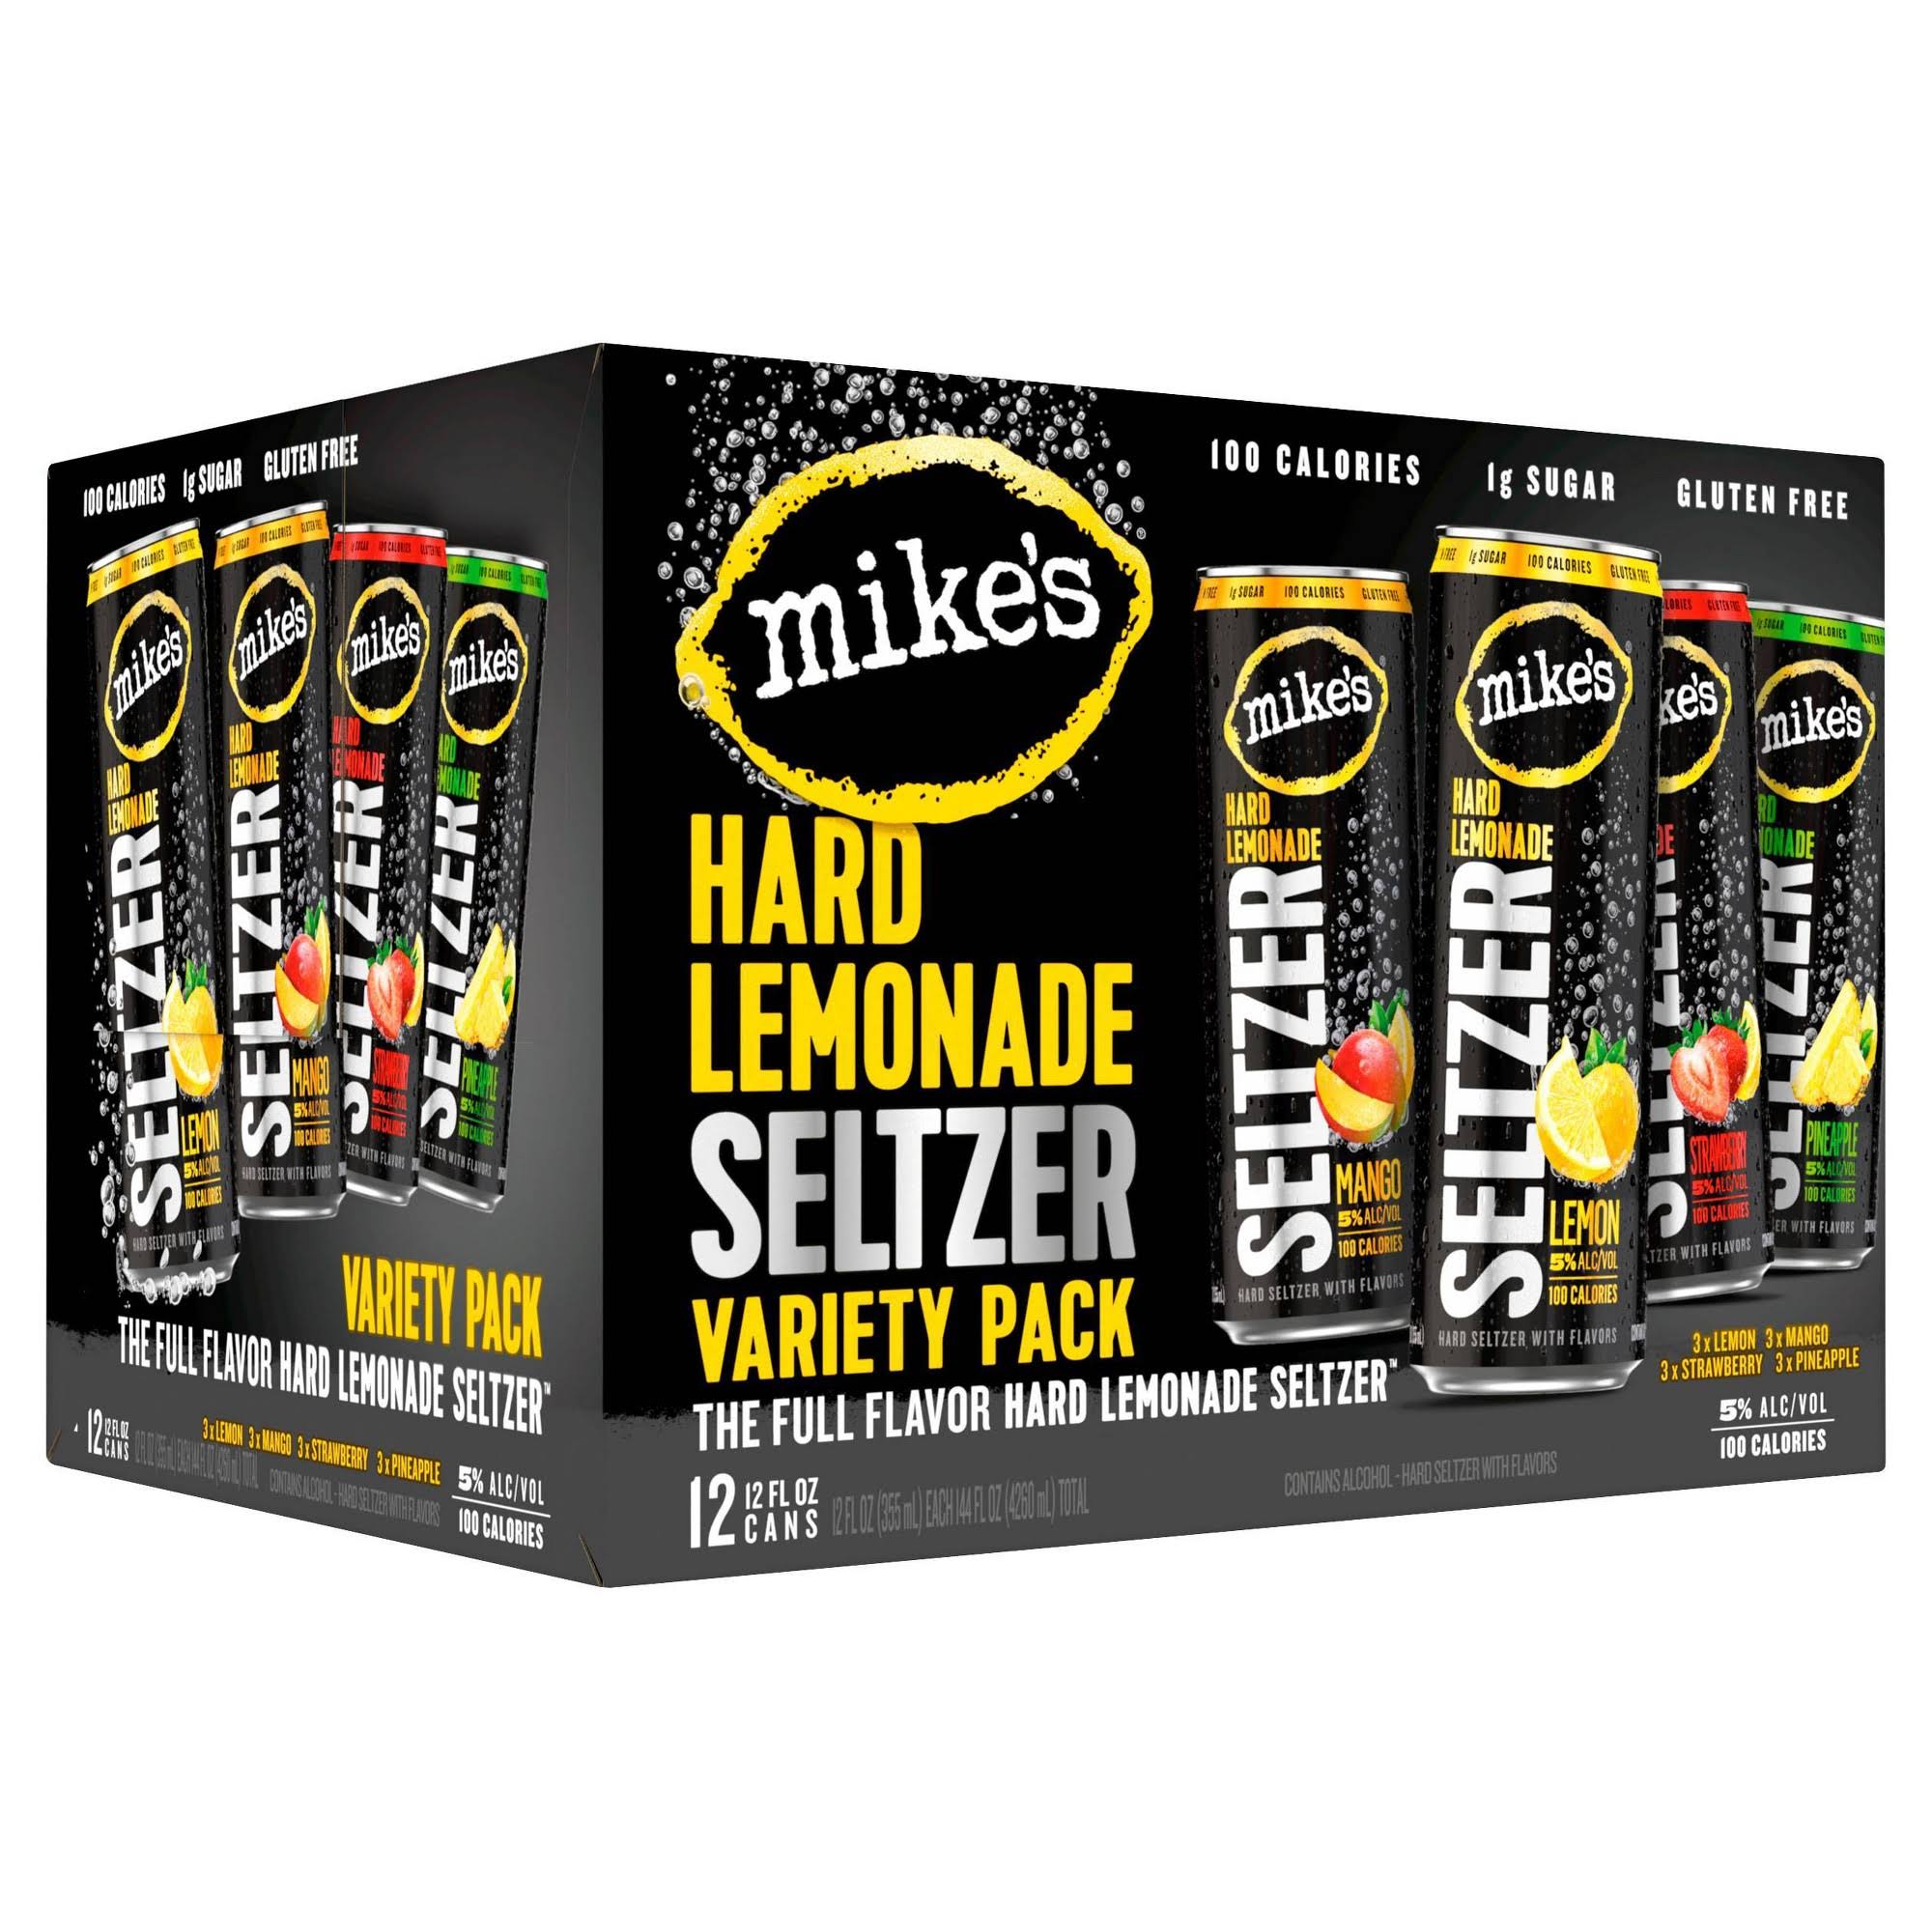 Possible Money Maker: Mike's Hard Lemonade Seltzer 12 Pack and get up to (14.99) in rebate